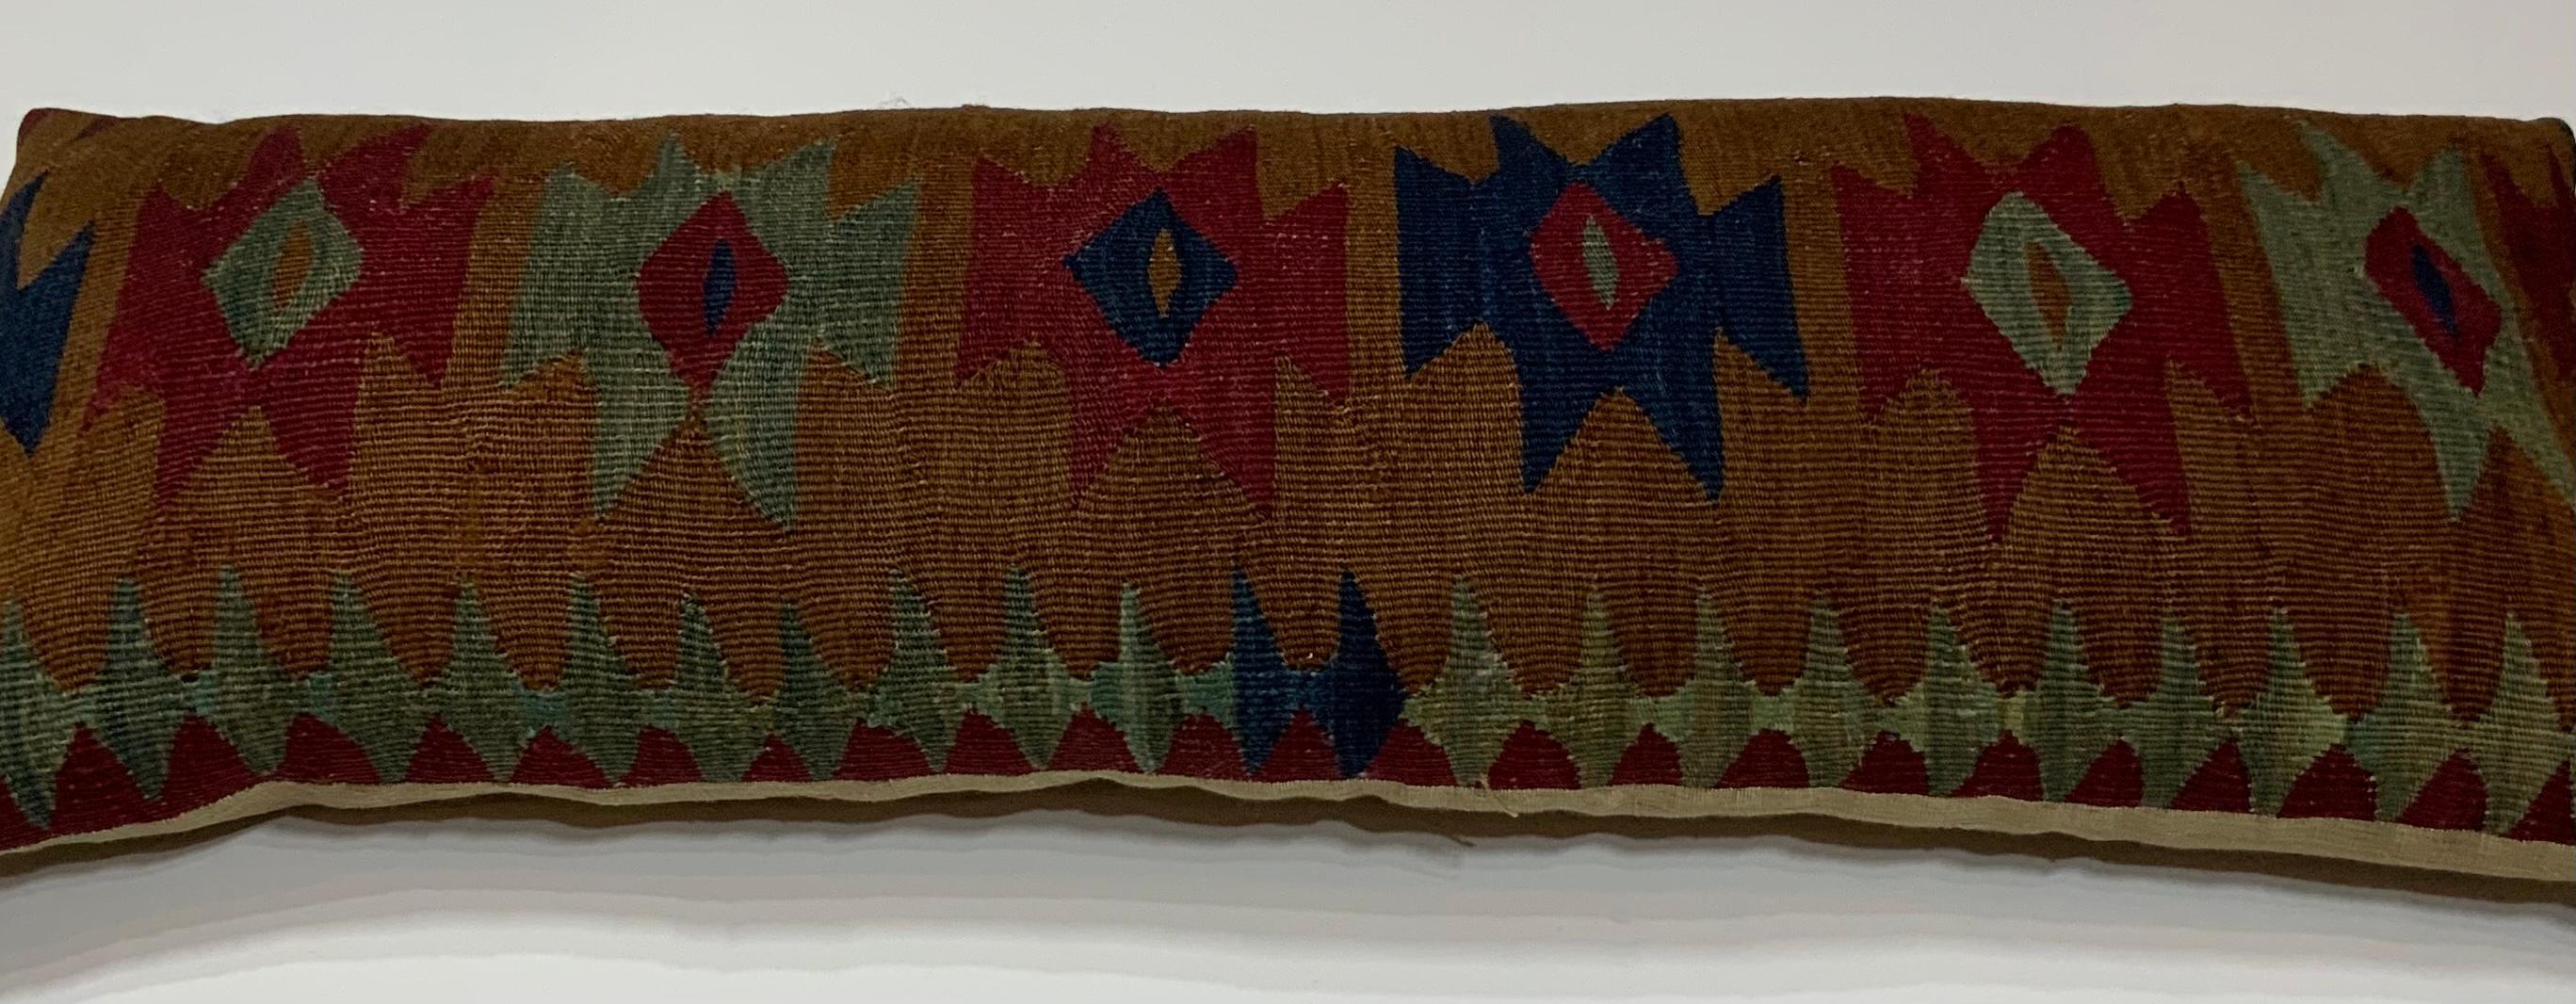 Beautiful pillow made of hand woven Antique textile with geometric motifs , fine quality insert . Cotton backing The textile is hand wash before become pillow .
Exceptional decorative addition to any room decor.